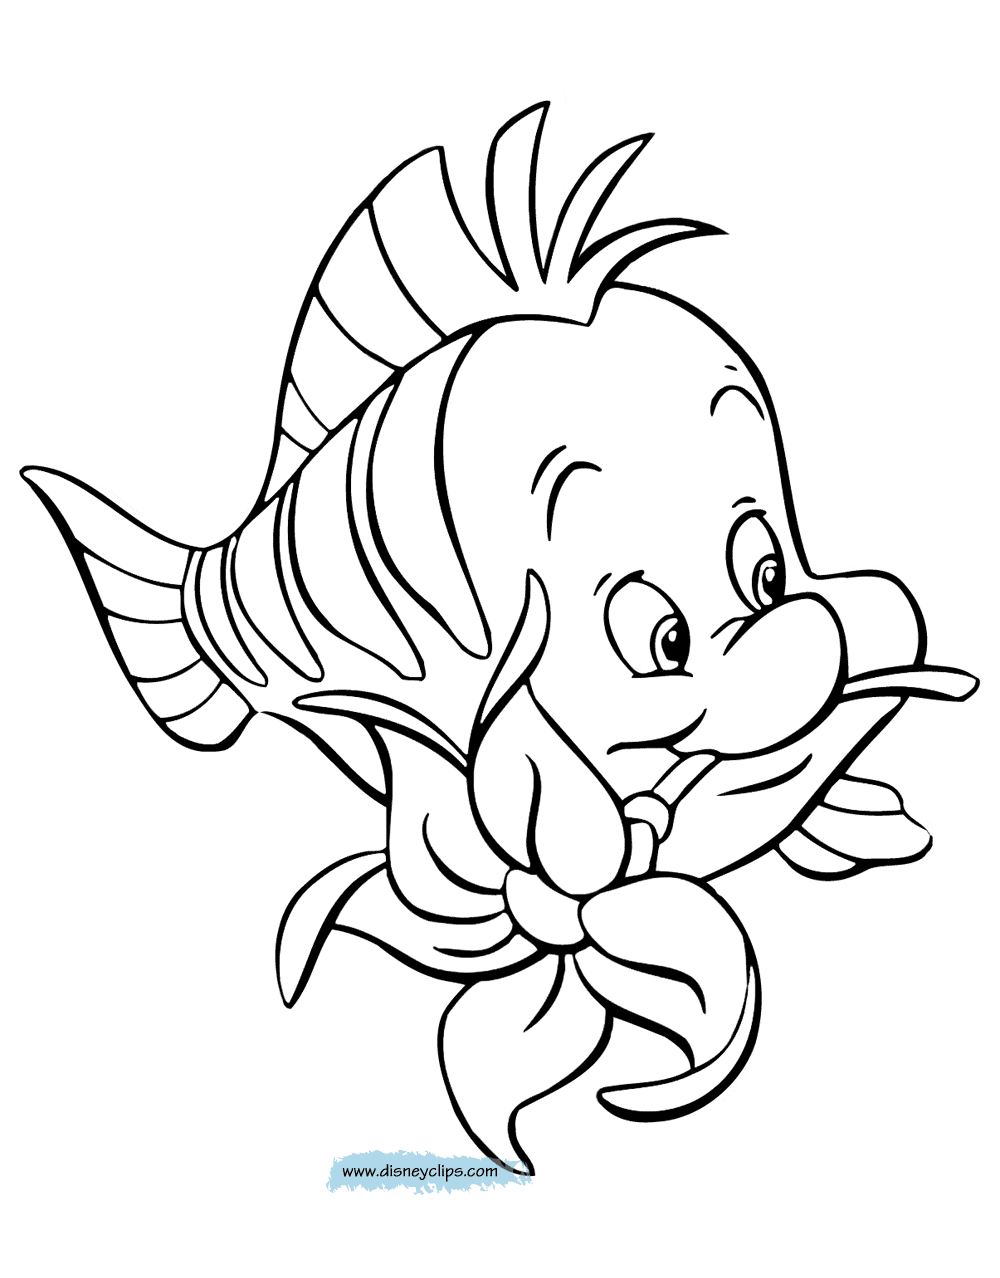 The Little Mermaid Coloring Pages 2 Disneyclipscom